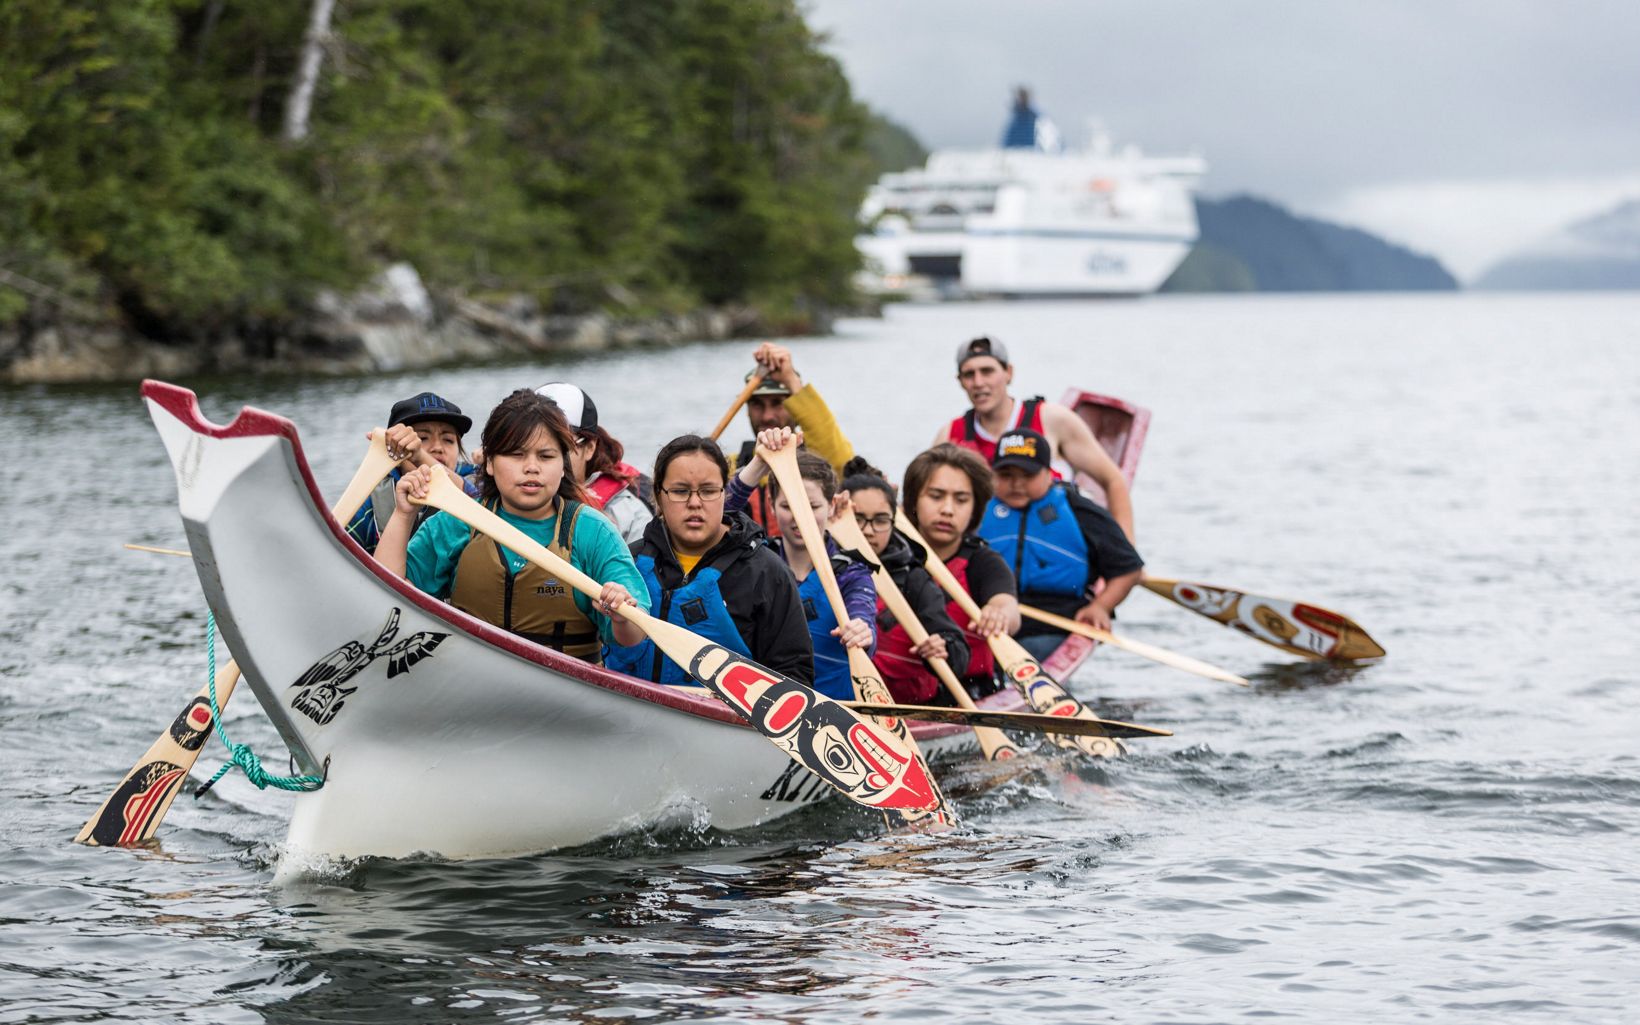 Several people paddle a traditional canoe on open water, with a cruise ship in the distance.